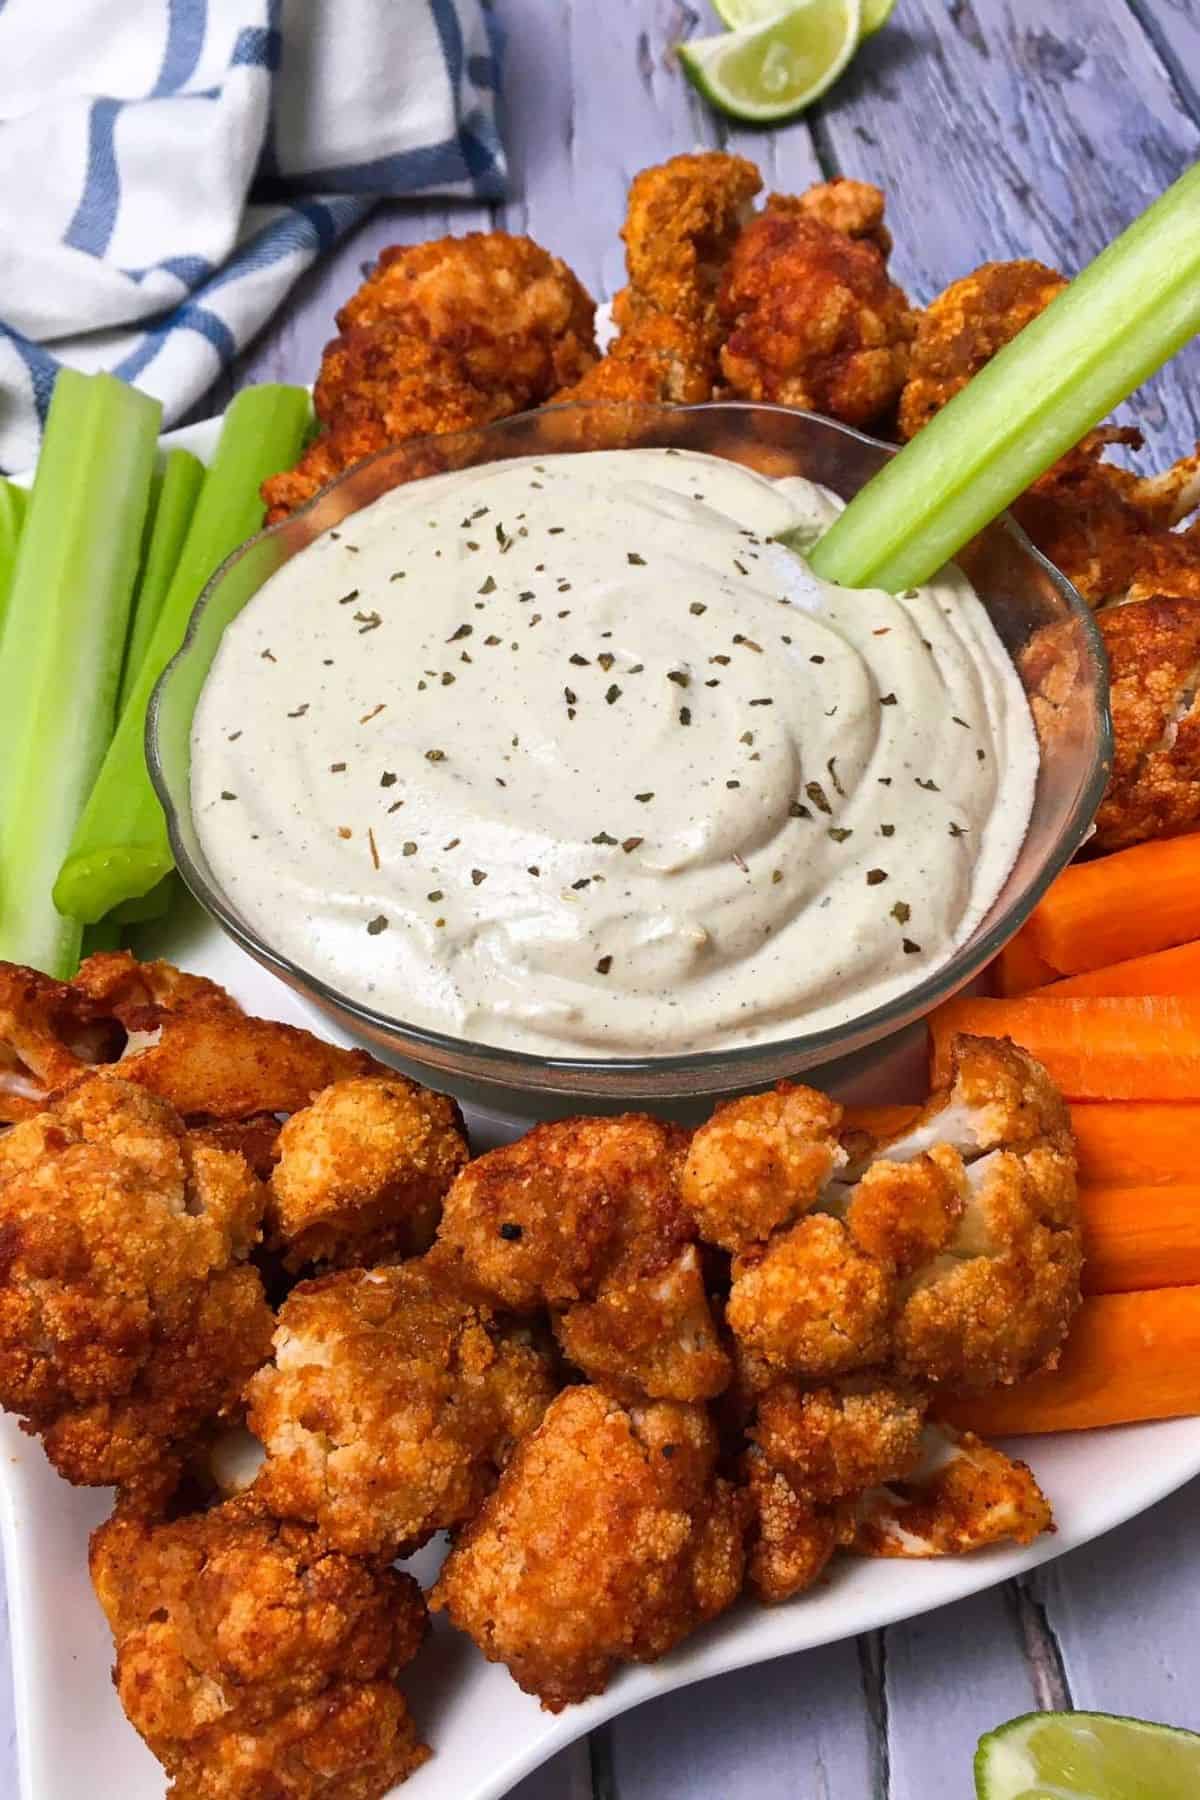 White platter with buffalo cauliflower, carrots and celery sticks with white dip in the center.